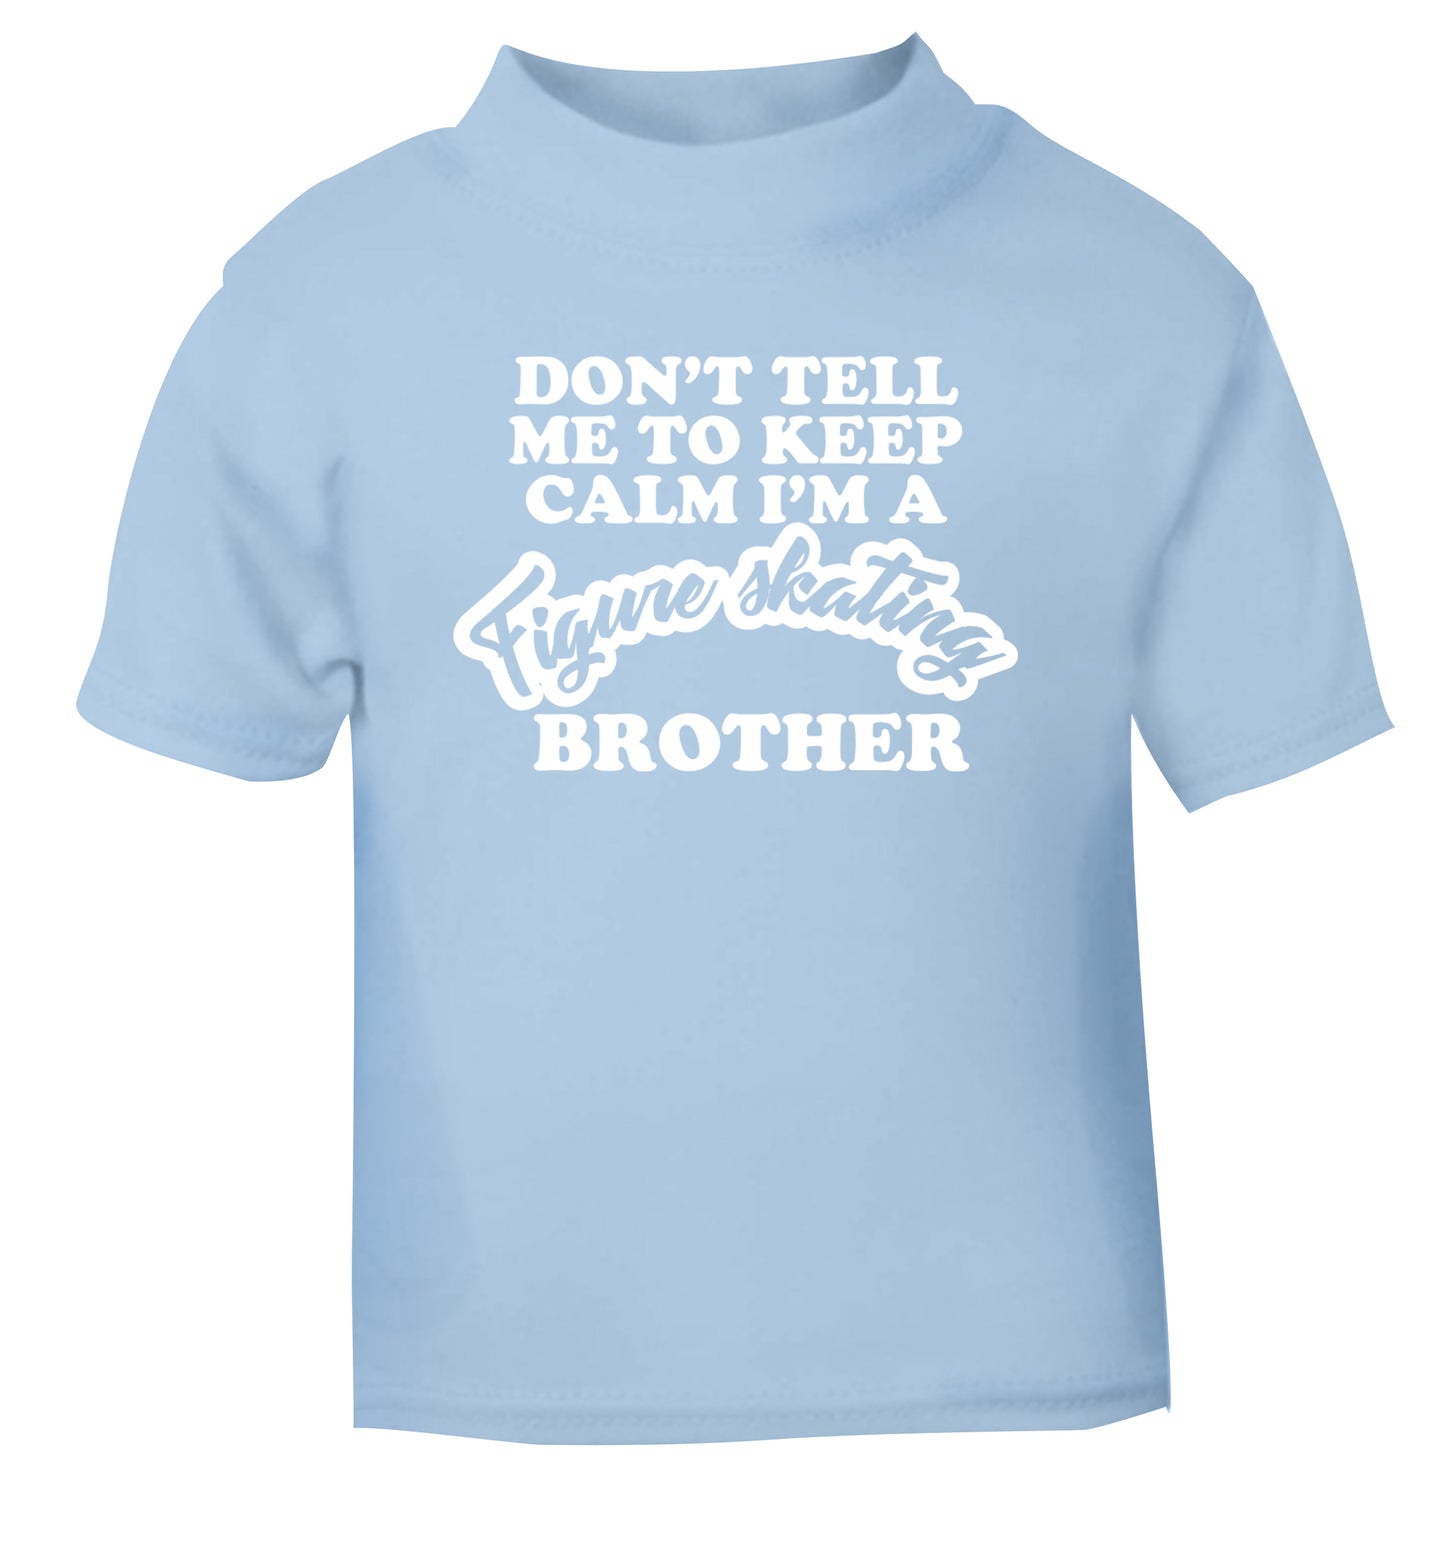 Don't tell me to keep calm I'm a figure skating brother light blue Baby Toddler Tshirt 2 Years